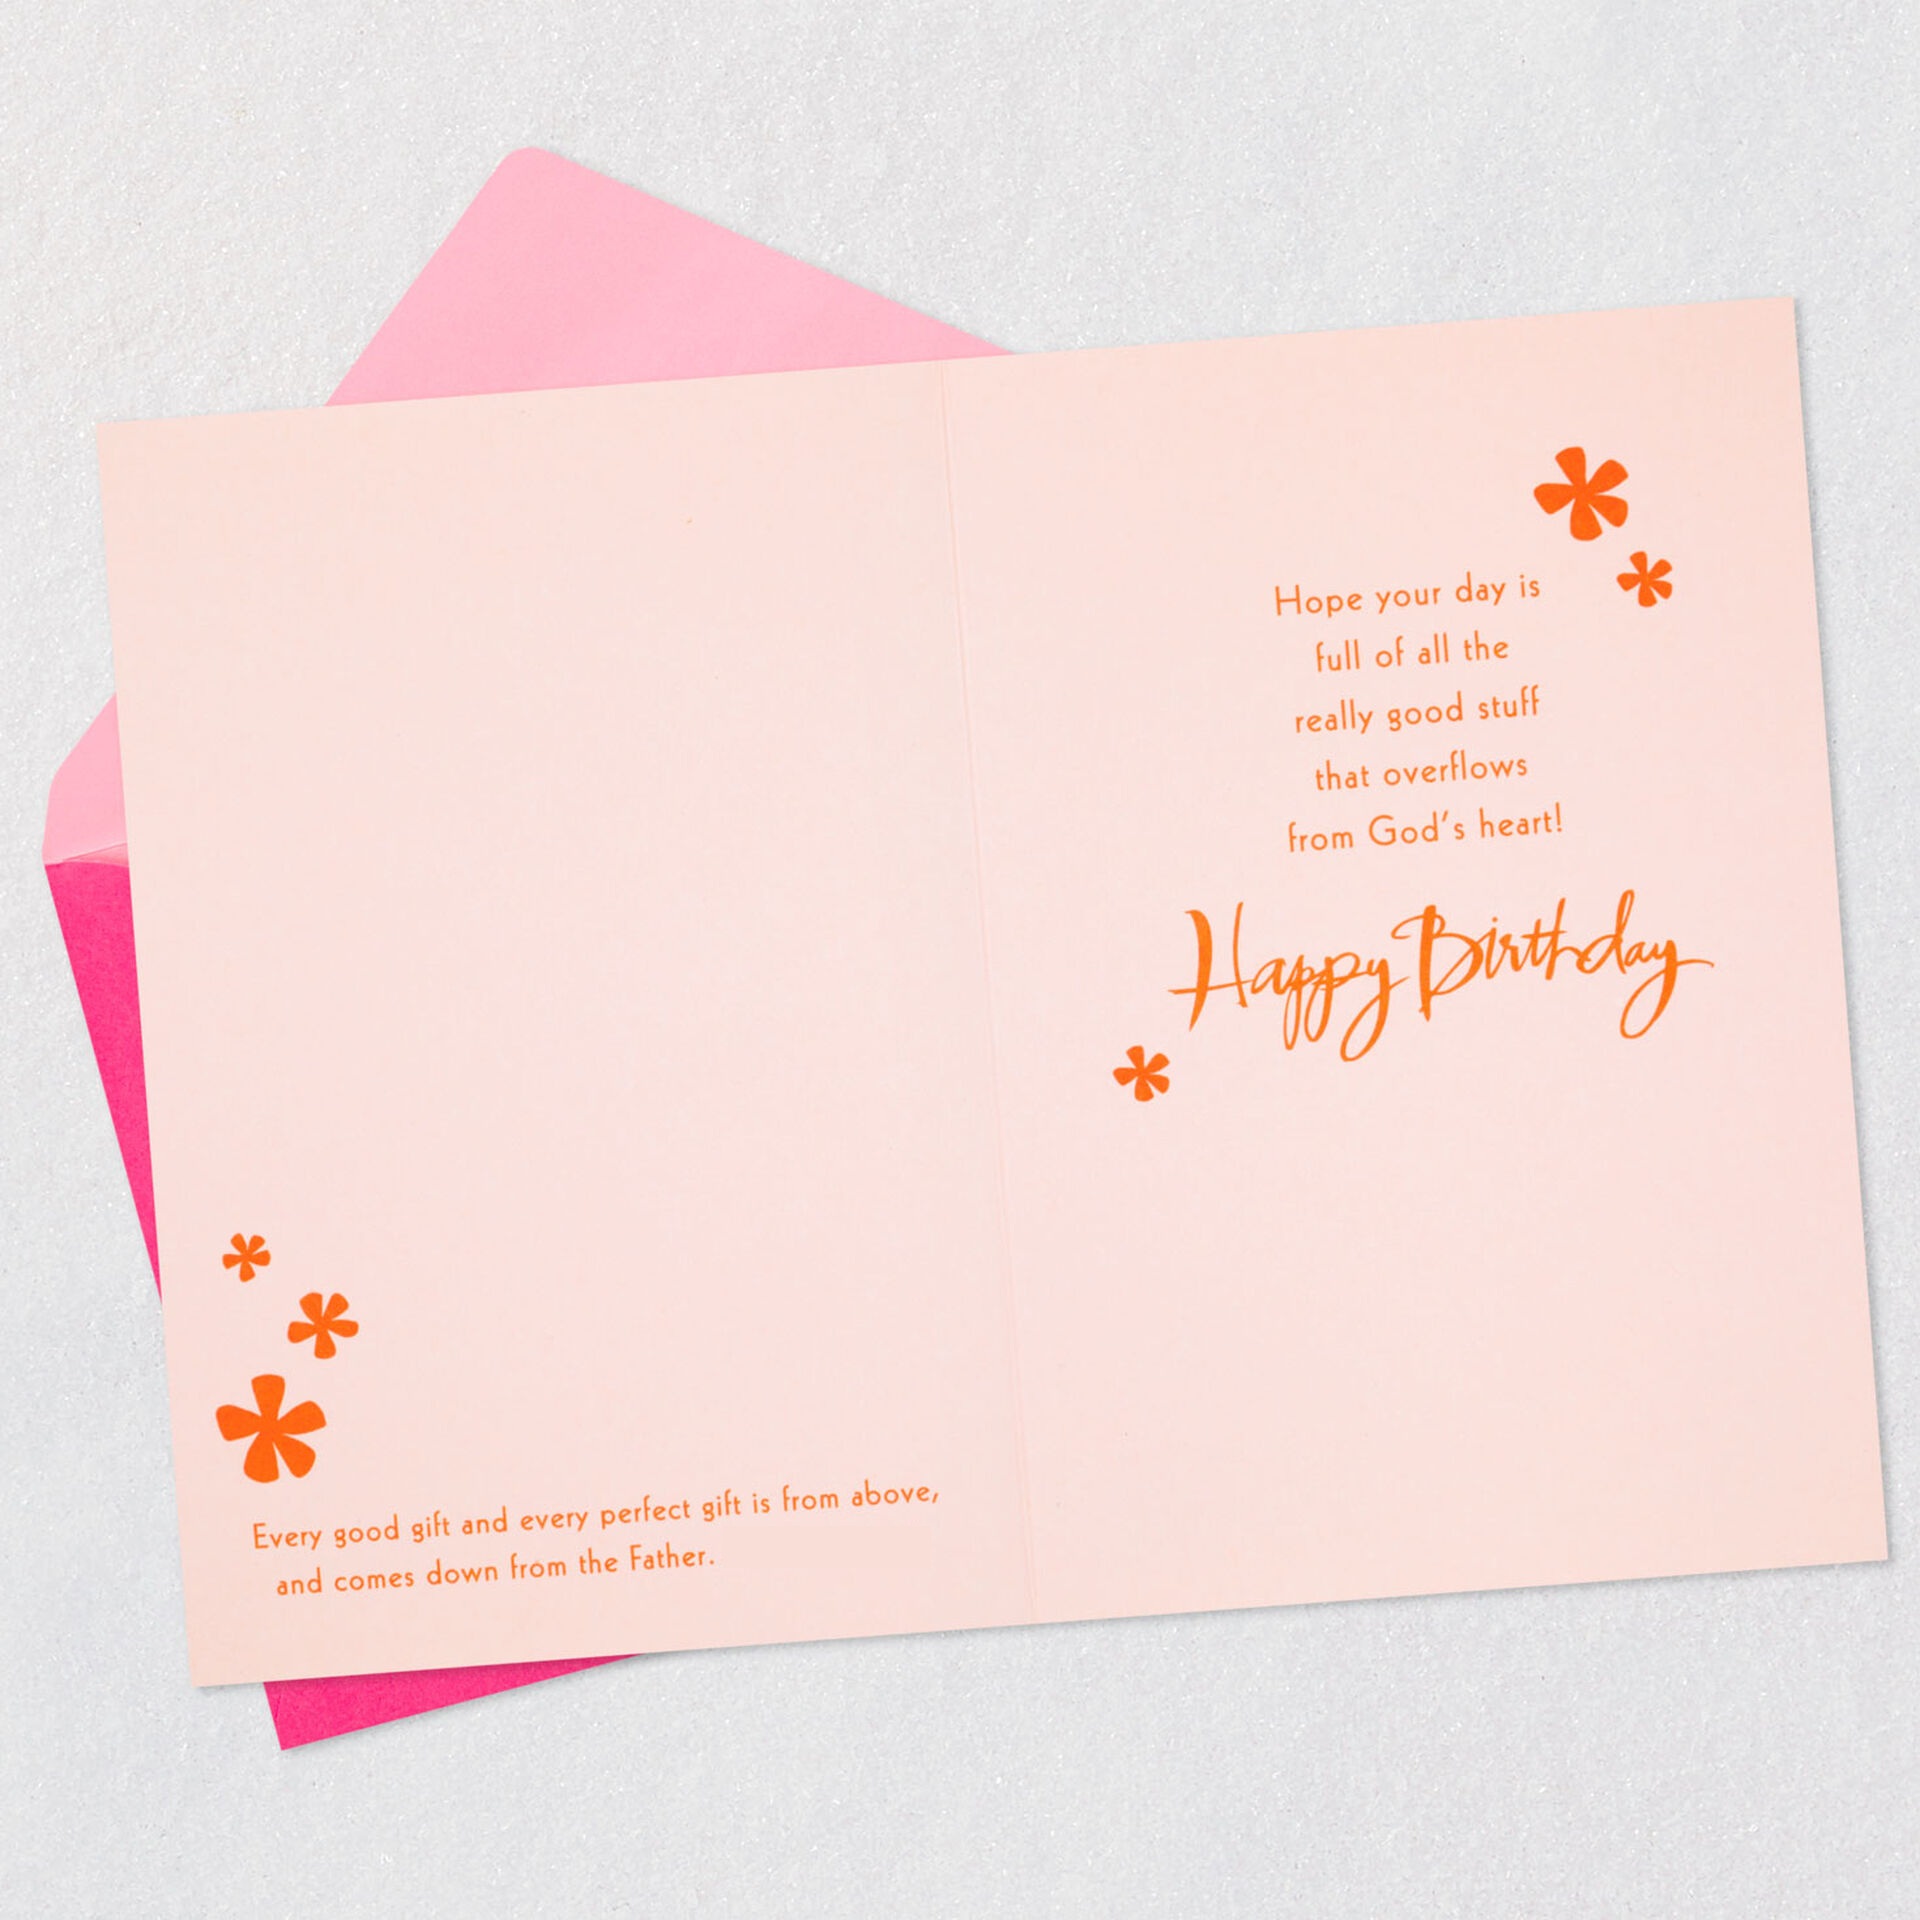 Birds-and-Flowers-Religious-Birthday-Card-for-Her_399CEY2801_04